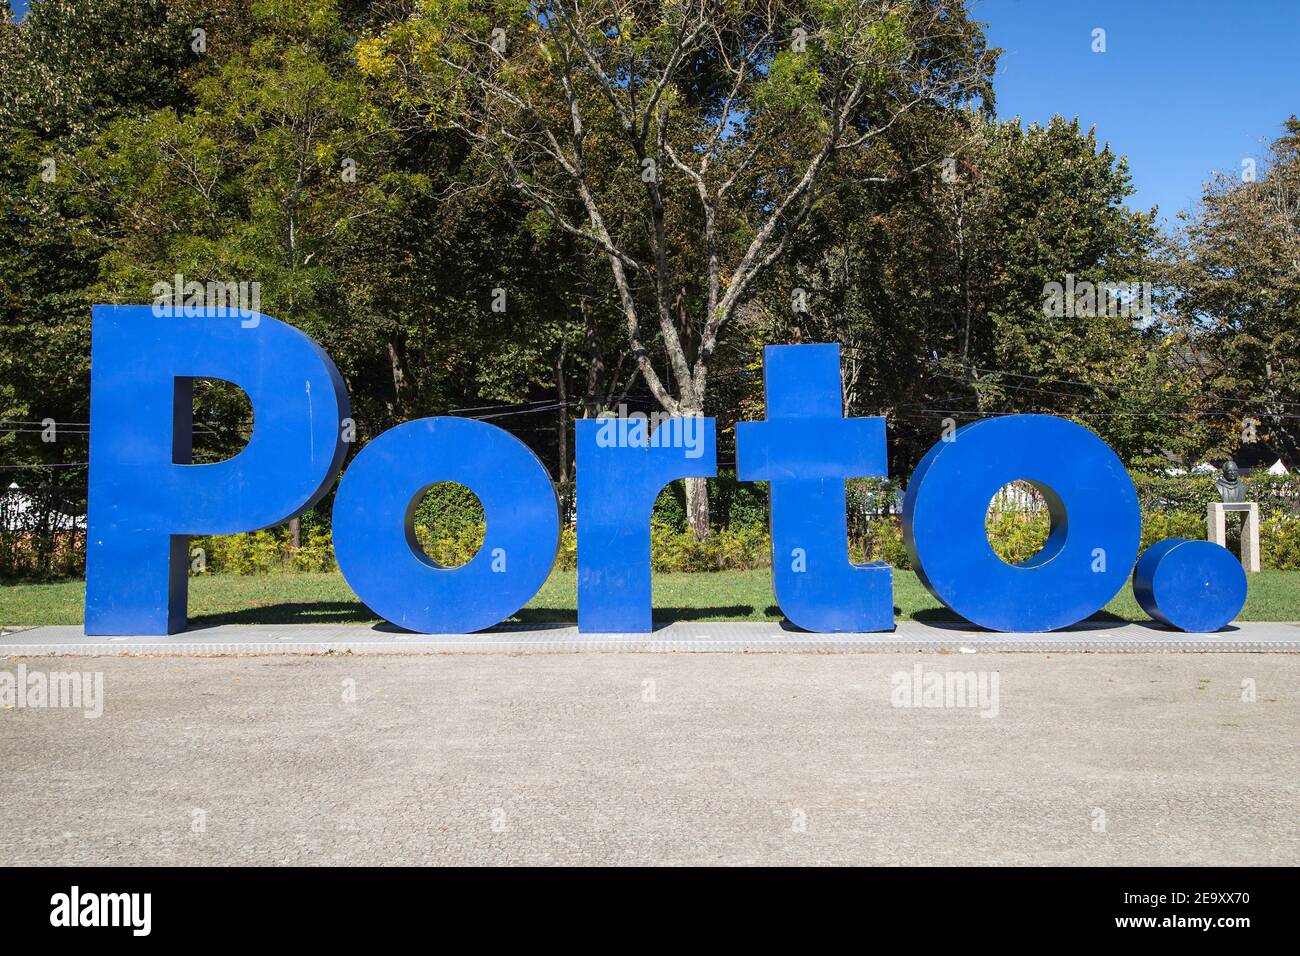 Porto, Portugal - August 25, 2020: Blue Porto Sign in the Crystal Palace Gardens, Porto, Portugal. Stock Photo